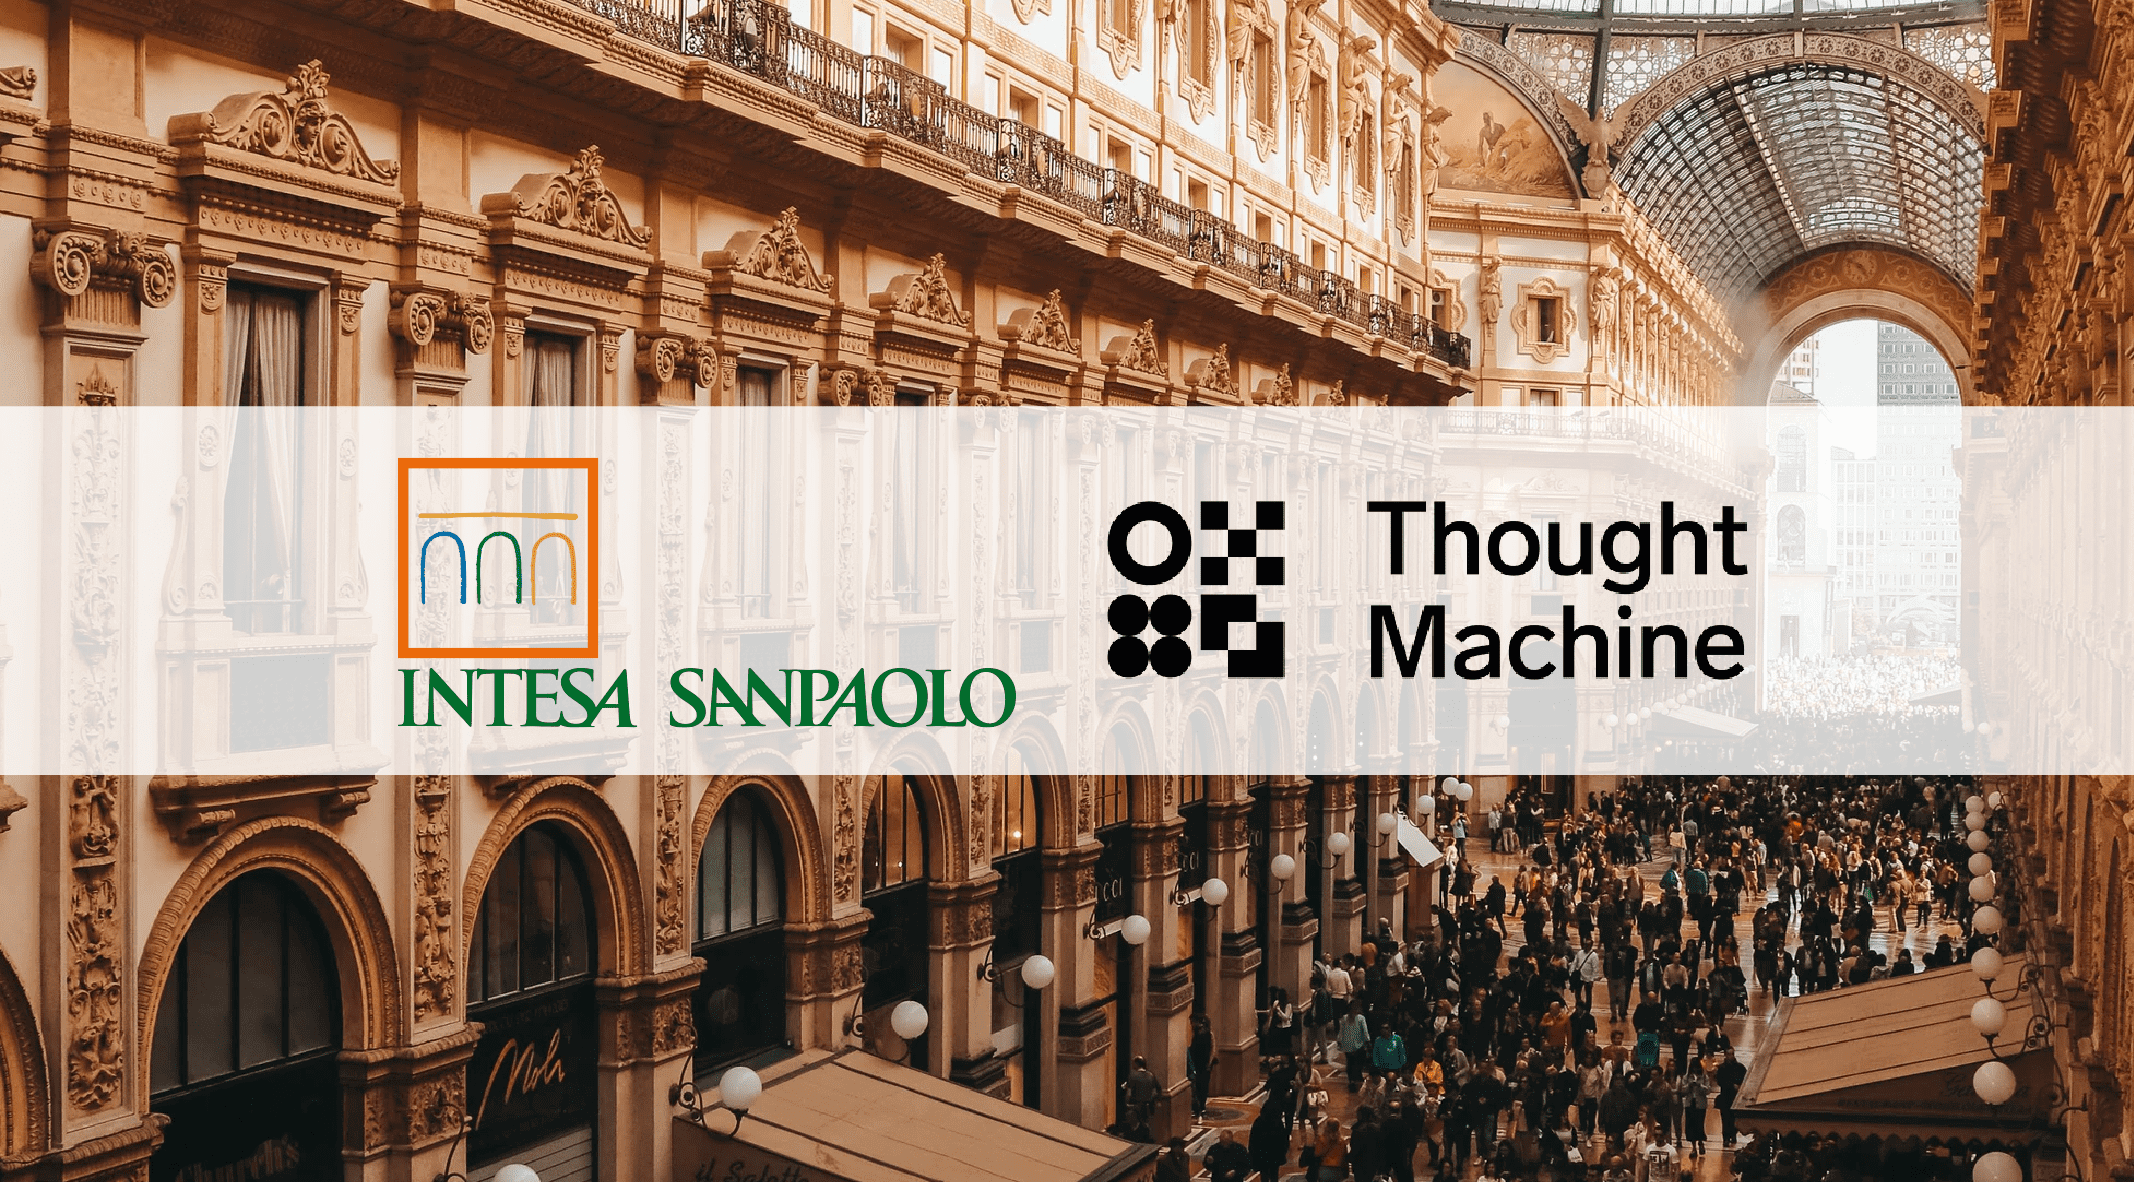 Intesa Sanpaolo invests £40 million into Thought Machine and selects Vault to power new digital banking platform